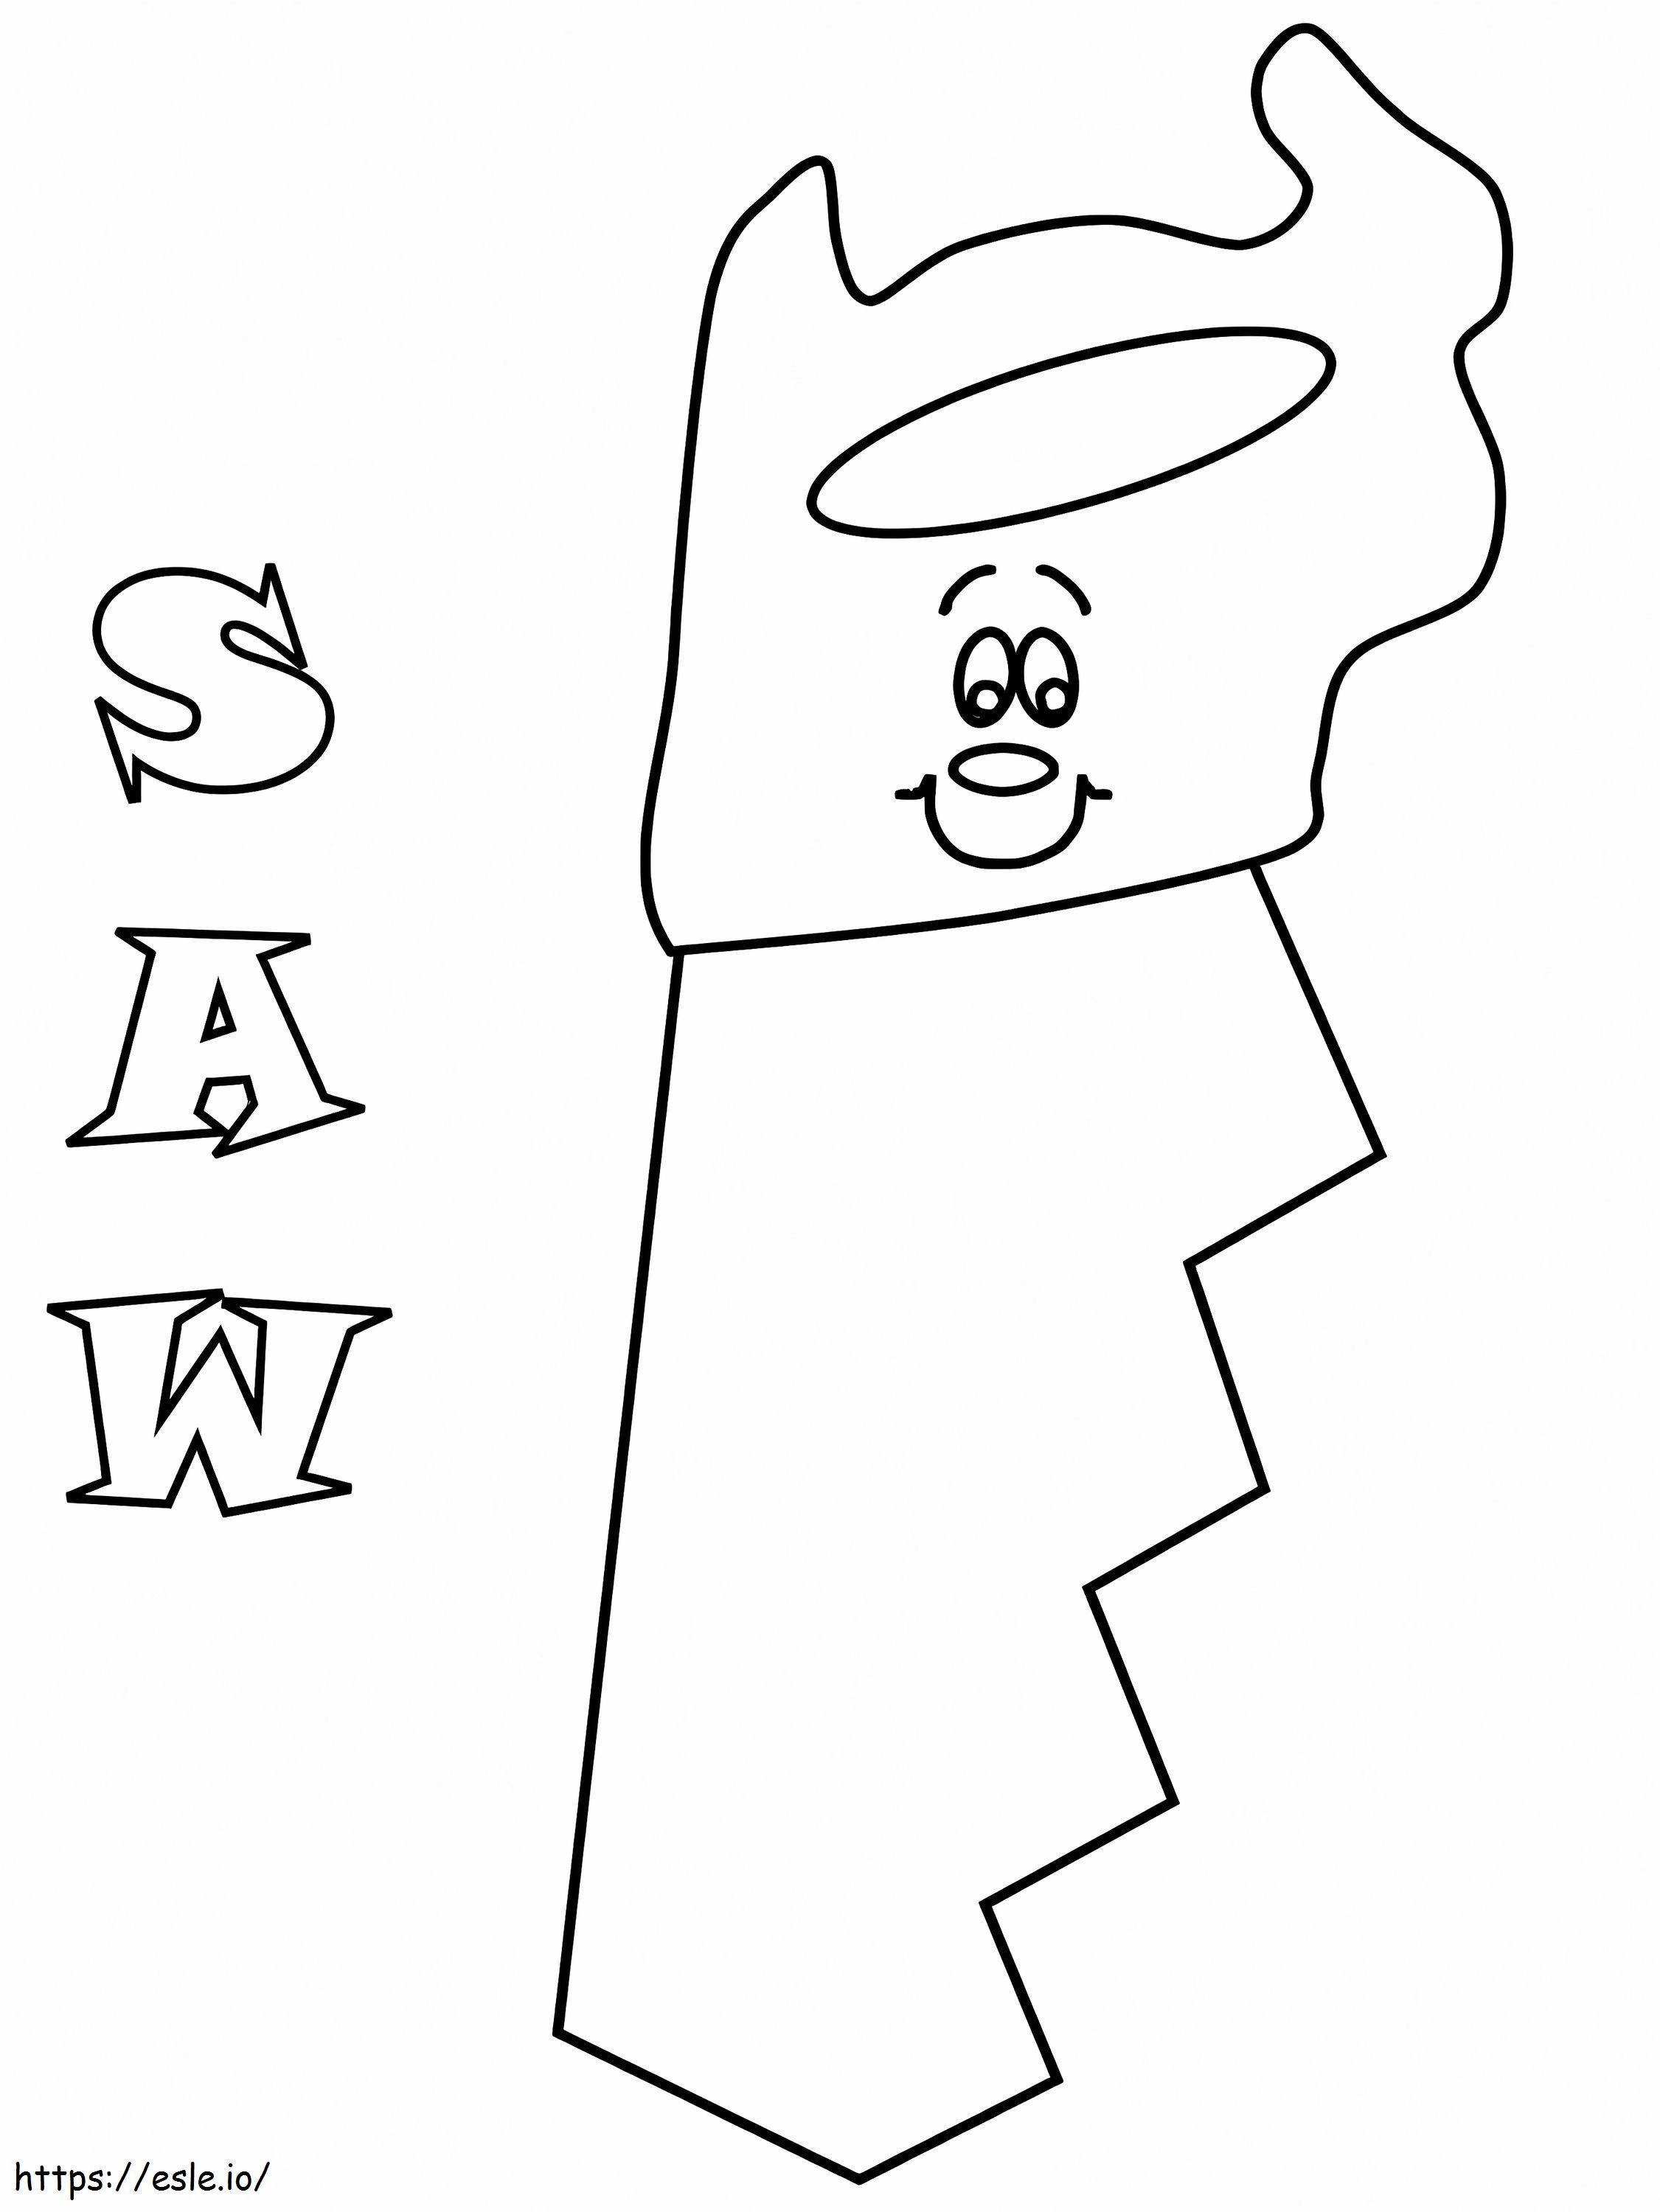 Cartoon Tool coloring page